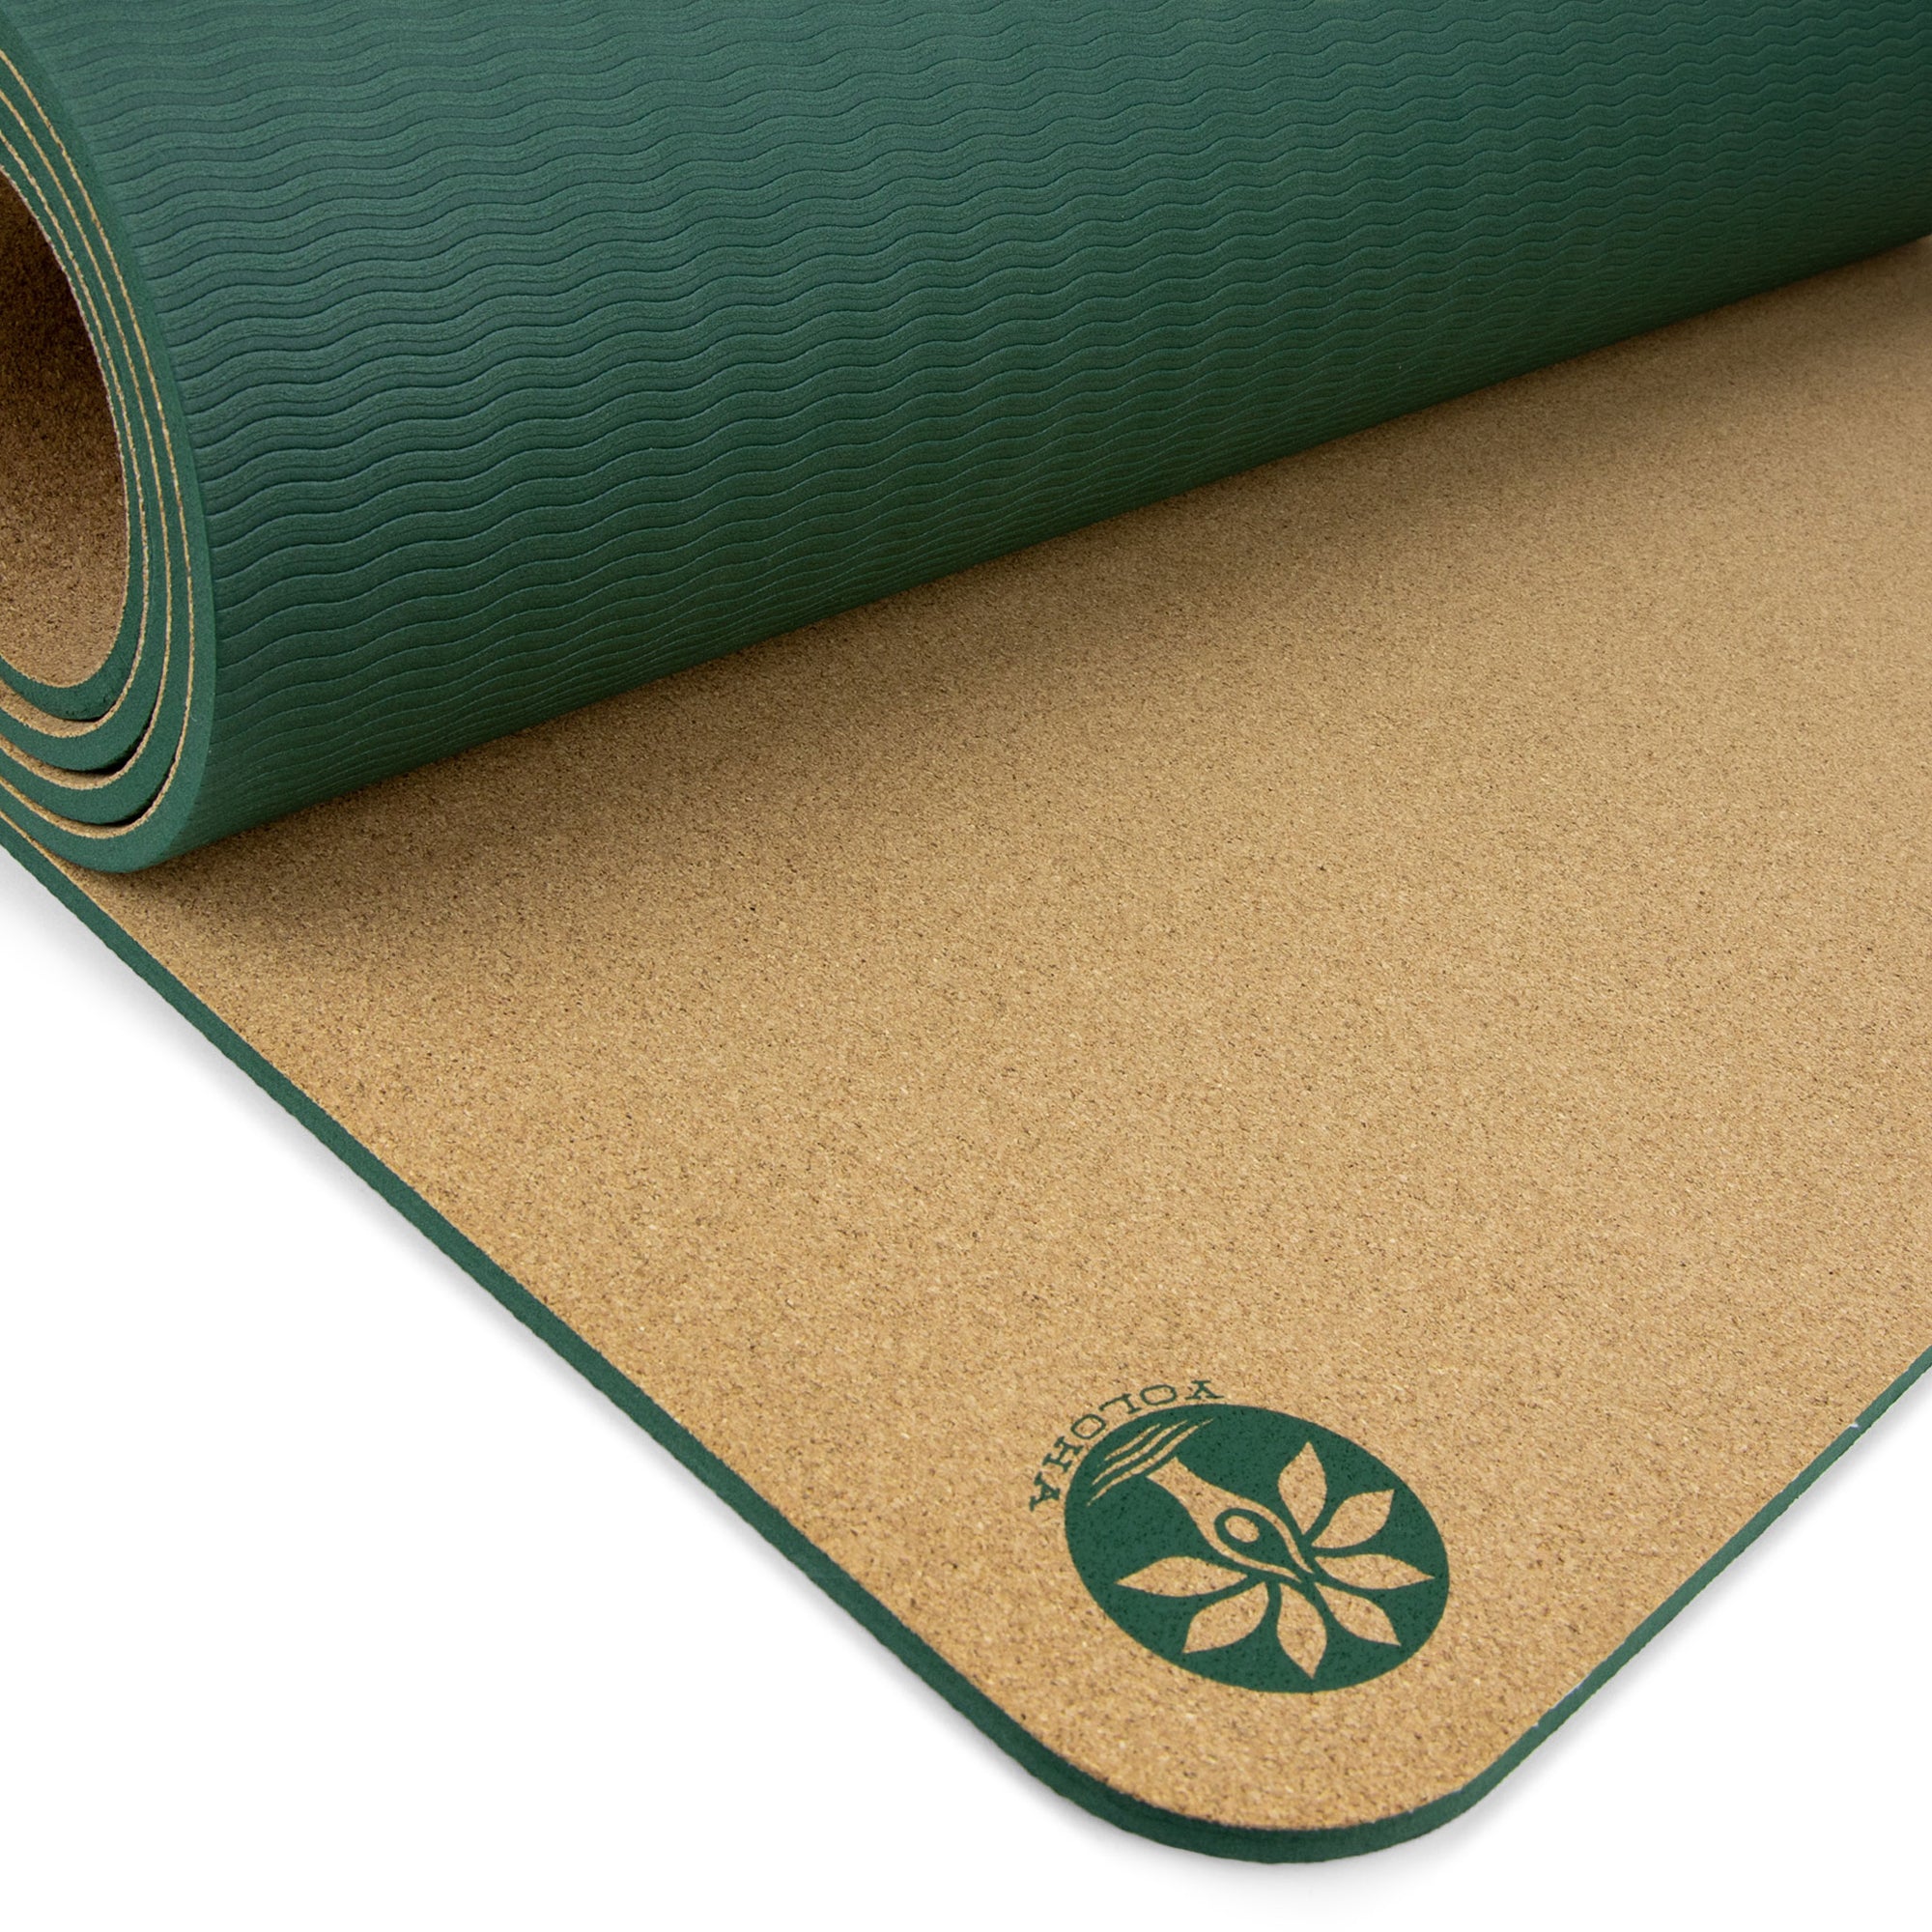 Nature Friendly Cork Yoga Mat - it is Made in Europe